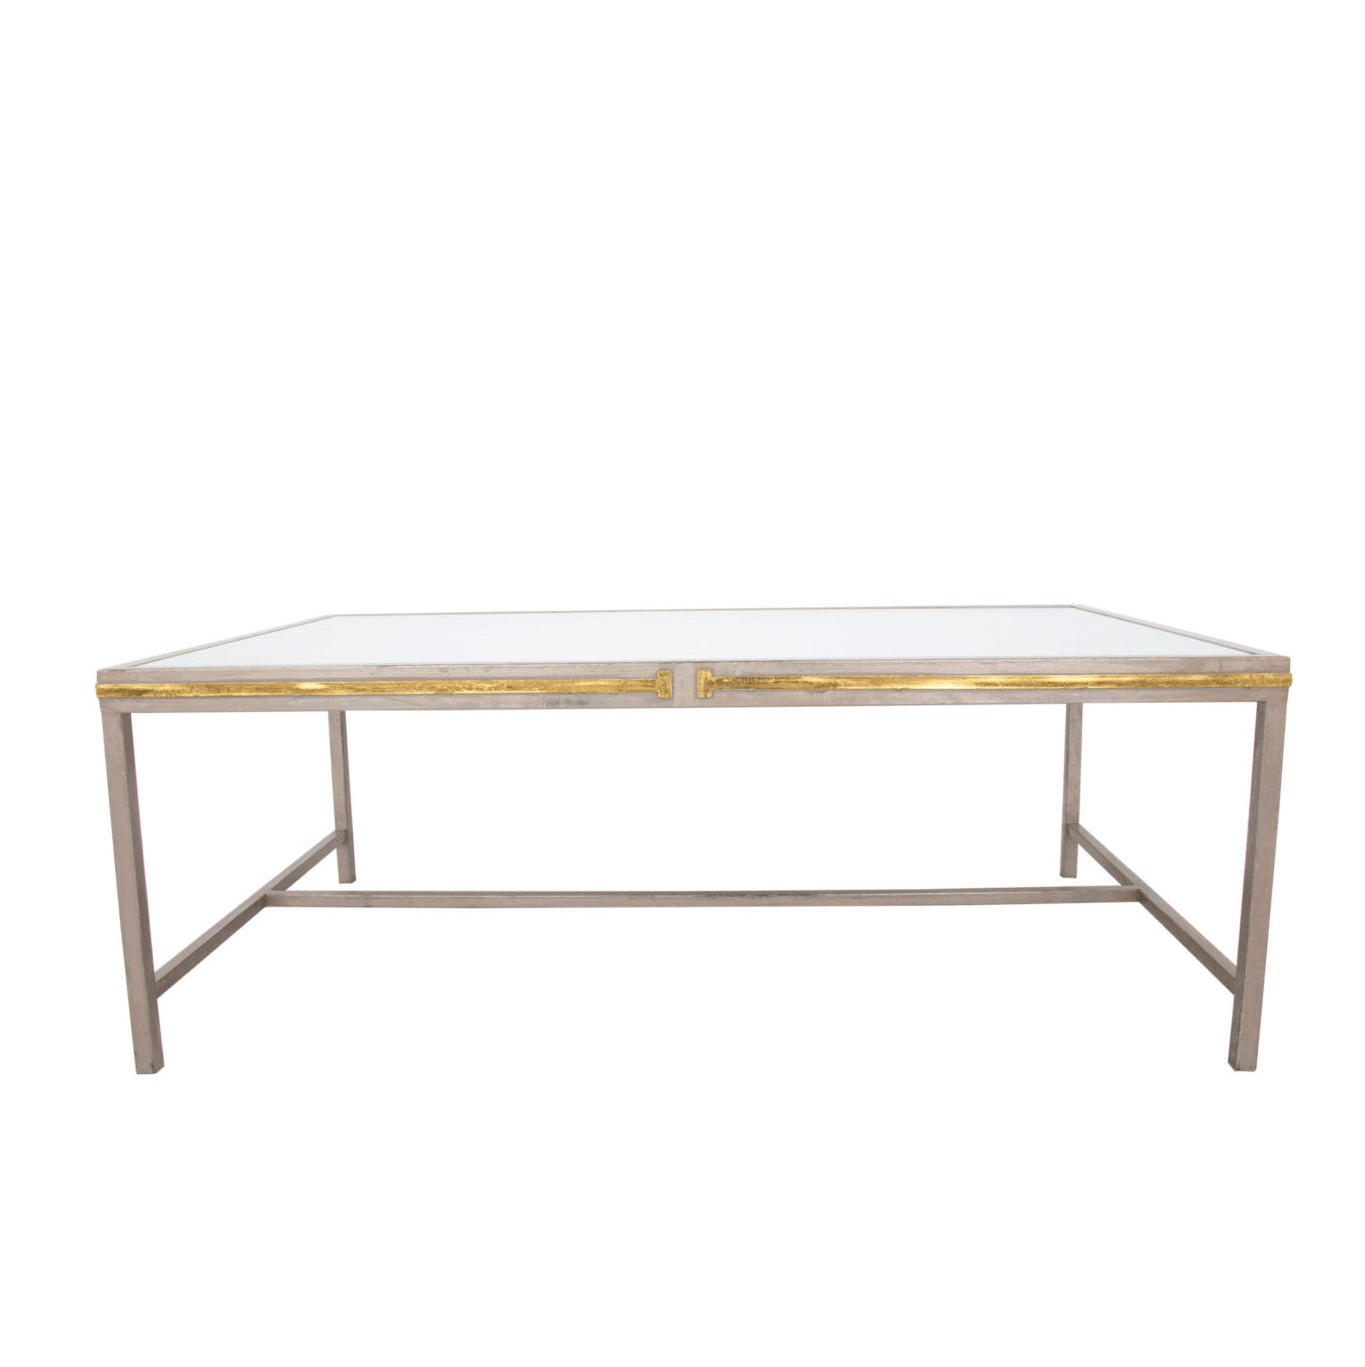 Celine Champagne & Gold Coffee Table- Lillian Home